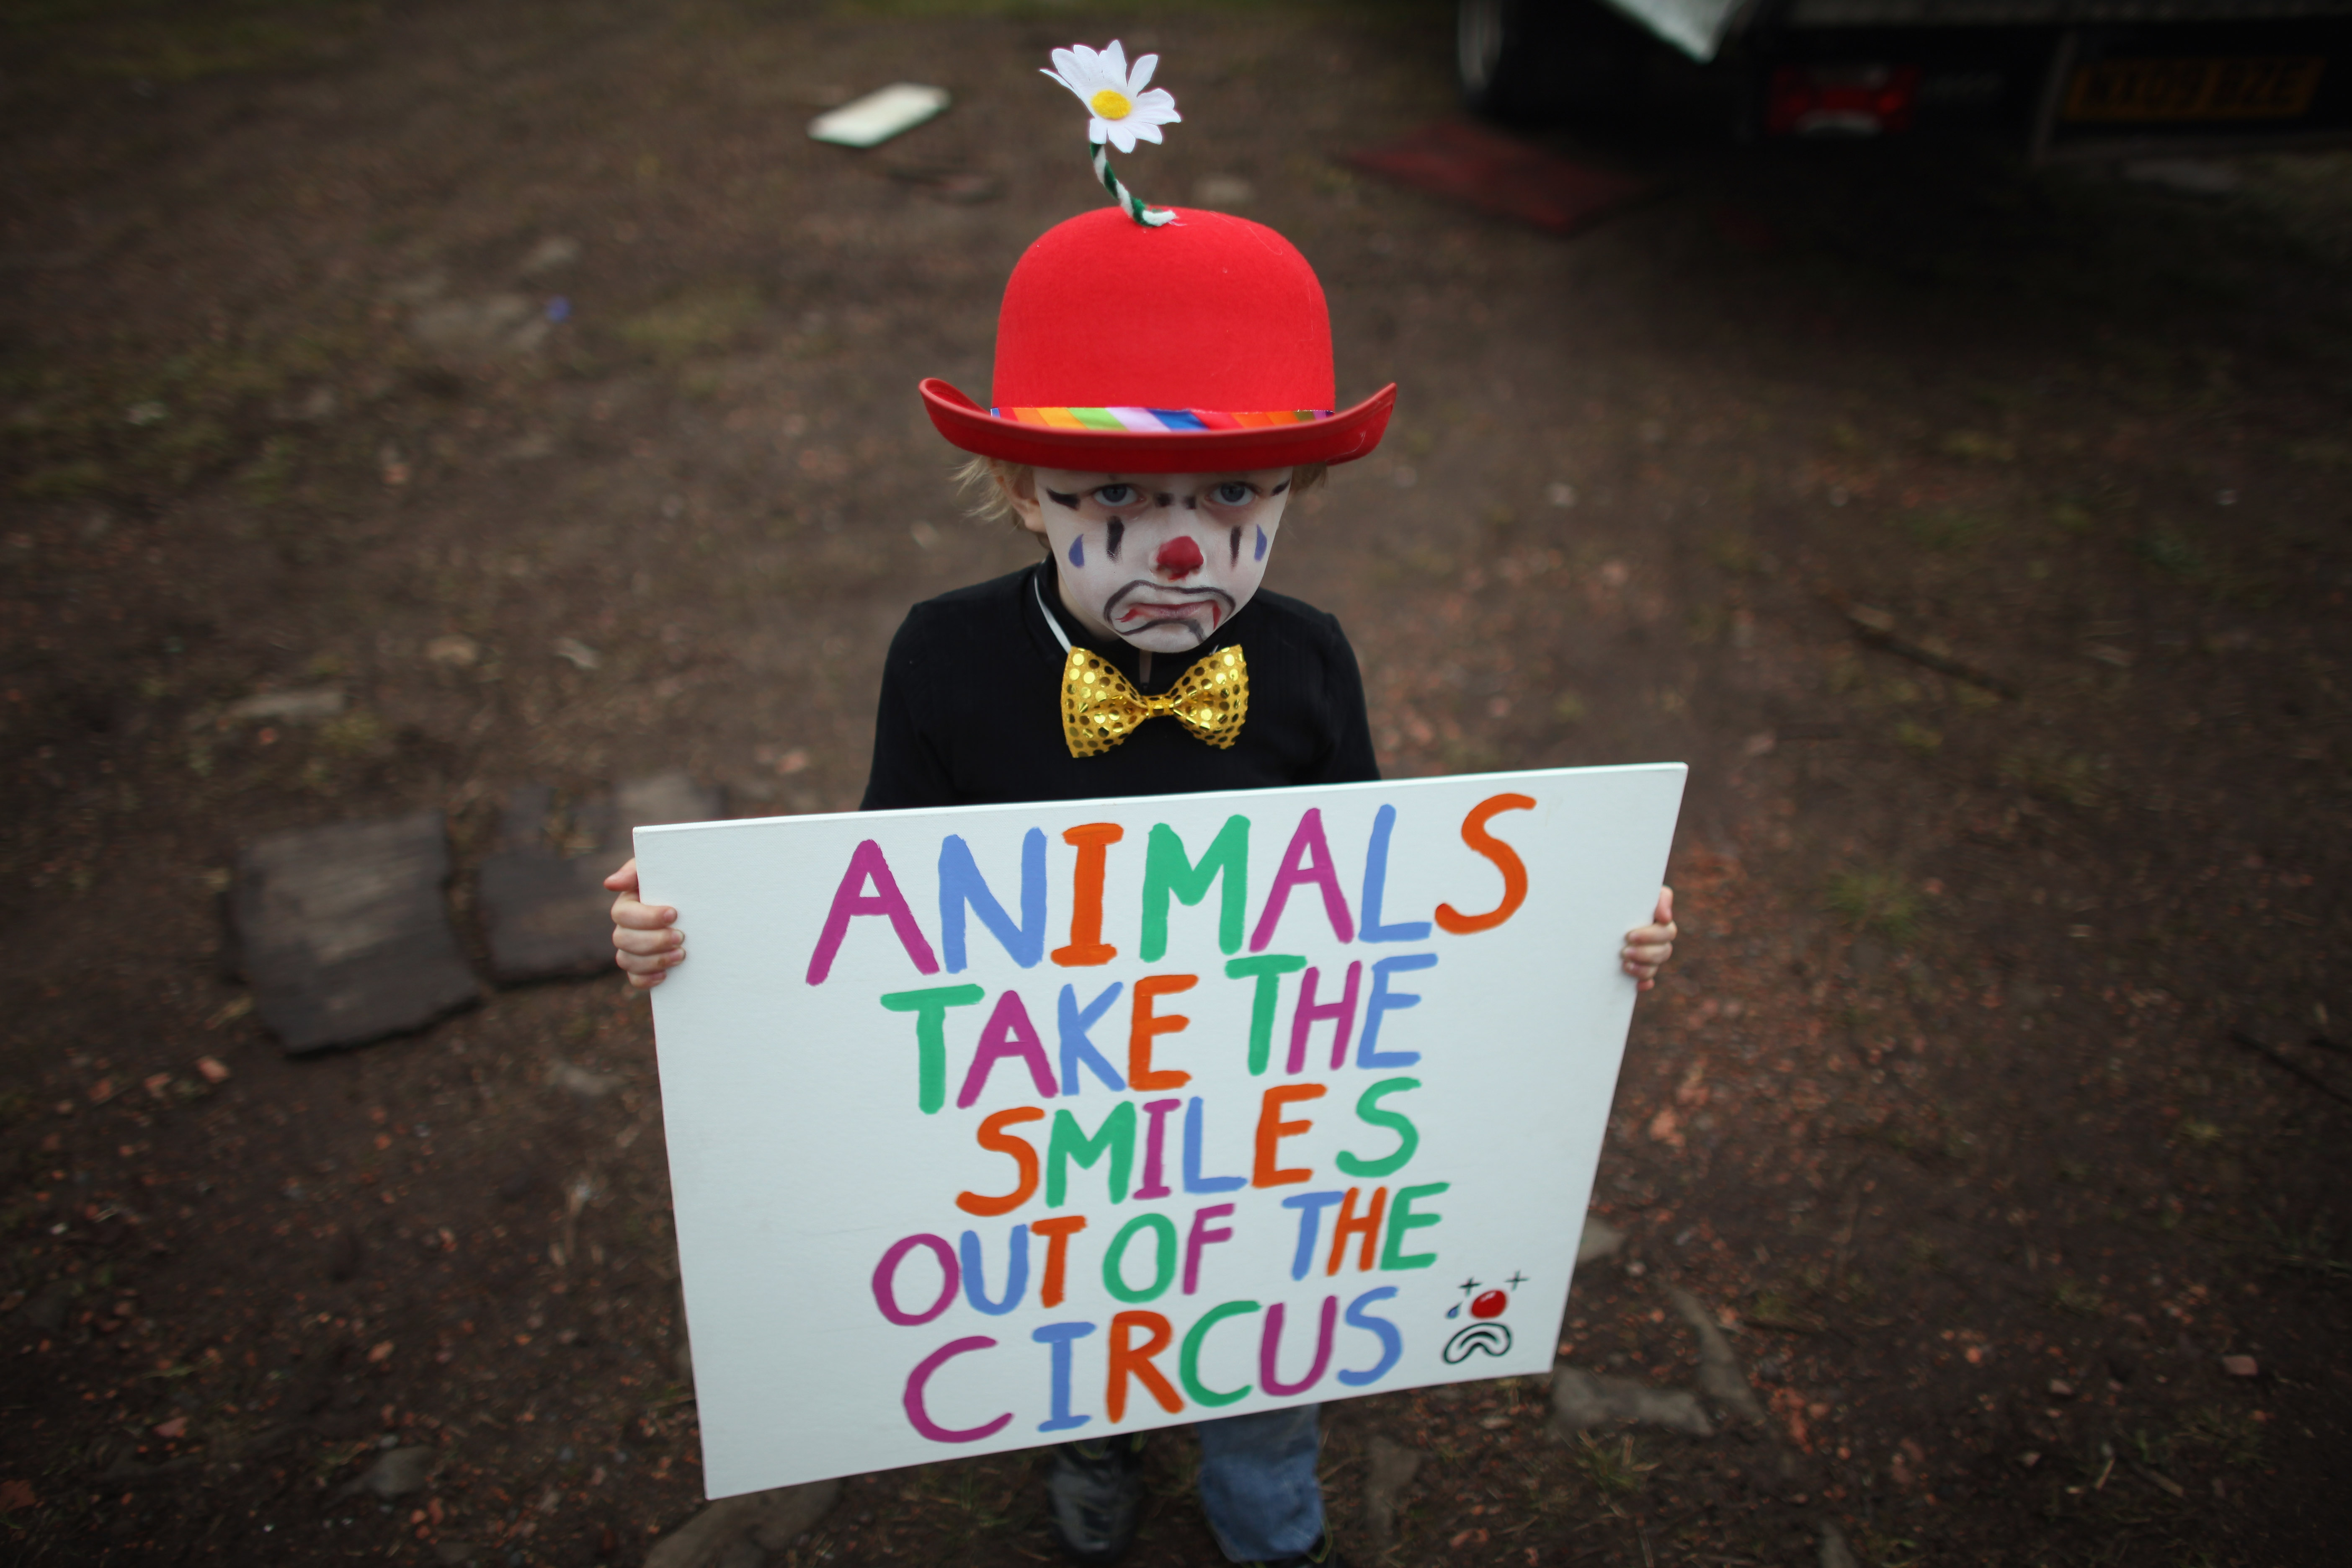 Four-year-old Gabriel Ryan takes part in a protest outside Bobby Roberts Circus on Knutsford Common on March 30, 2011 in Knutsford, England. (Photo by Christopher Furlong/Getty Images)